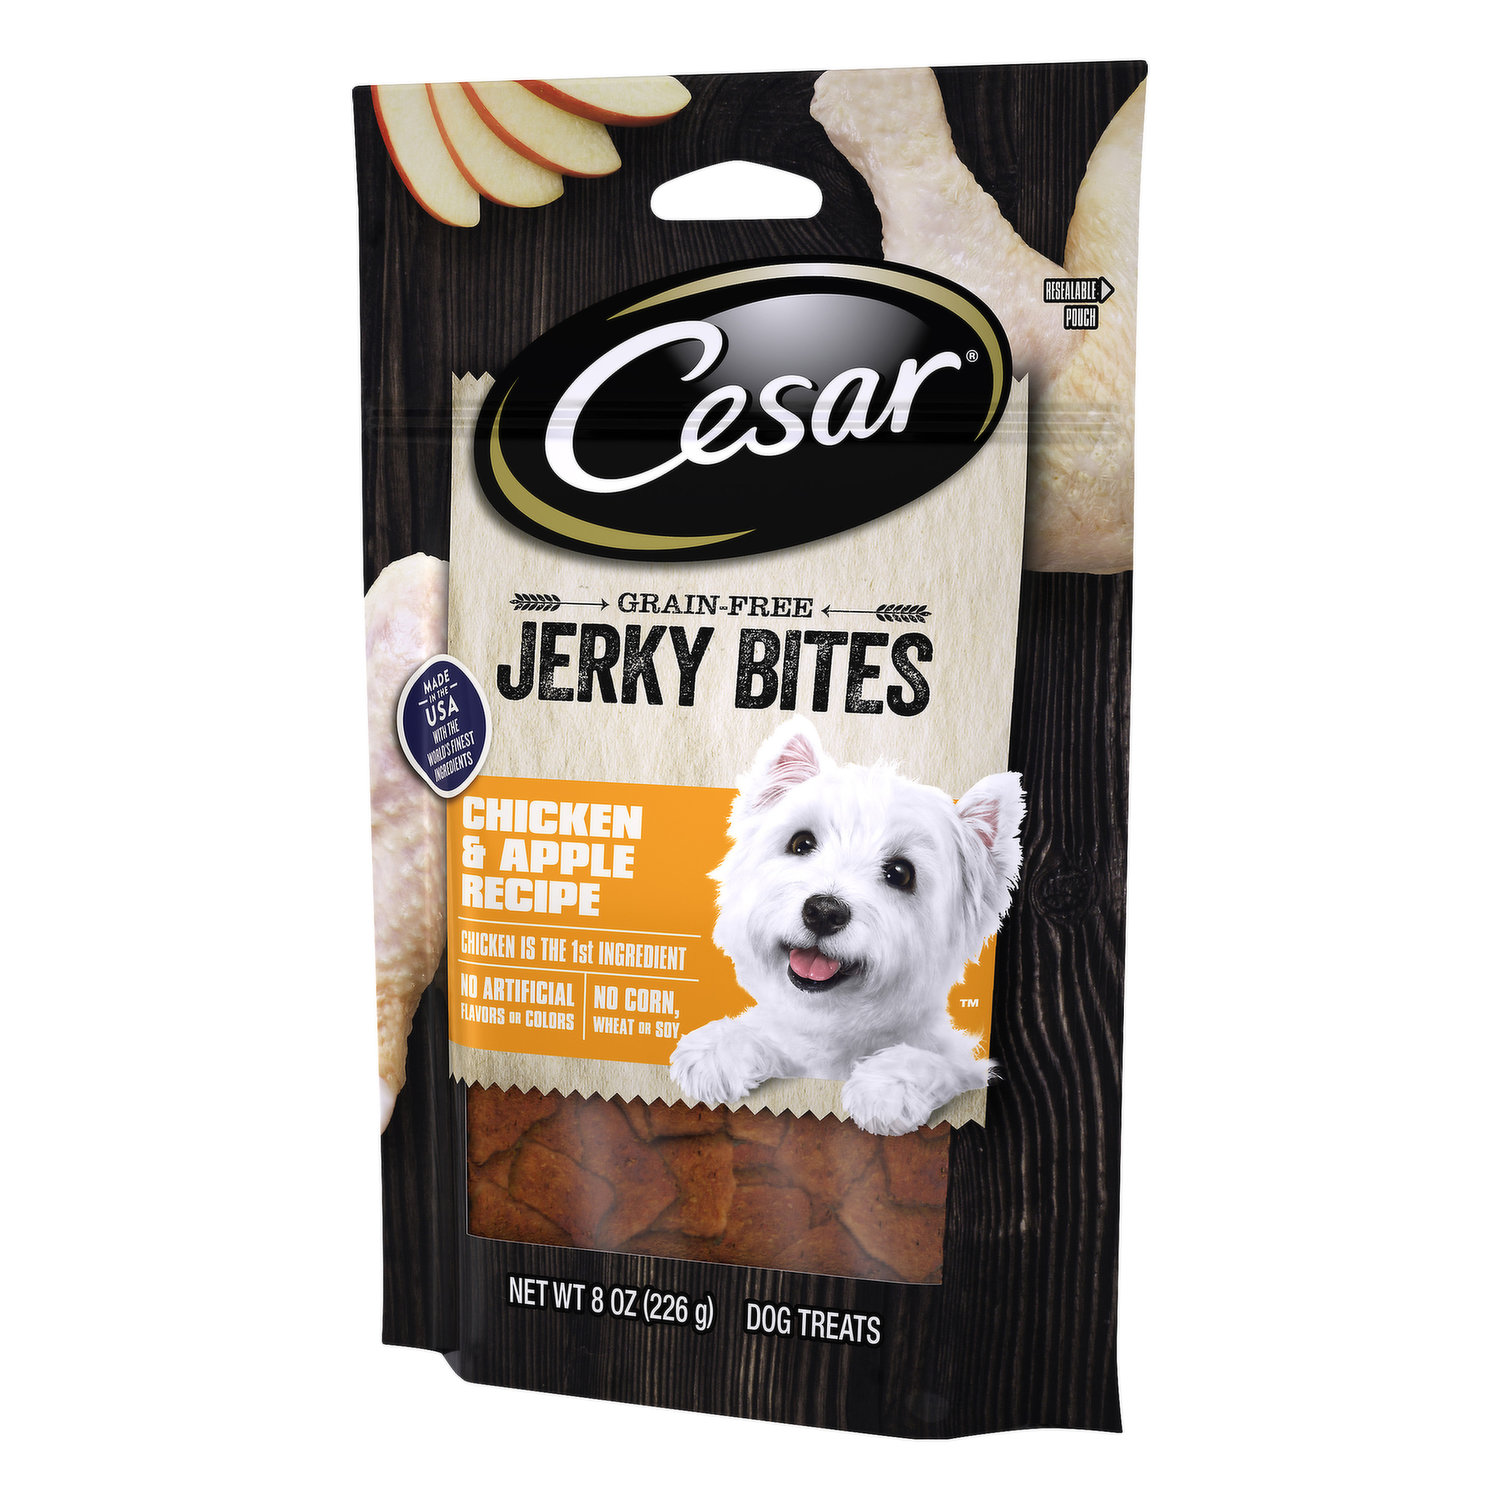 what are the ingredients in cesar dog food